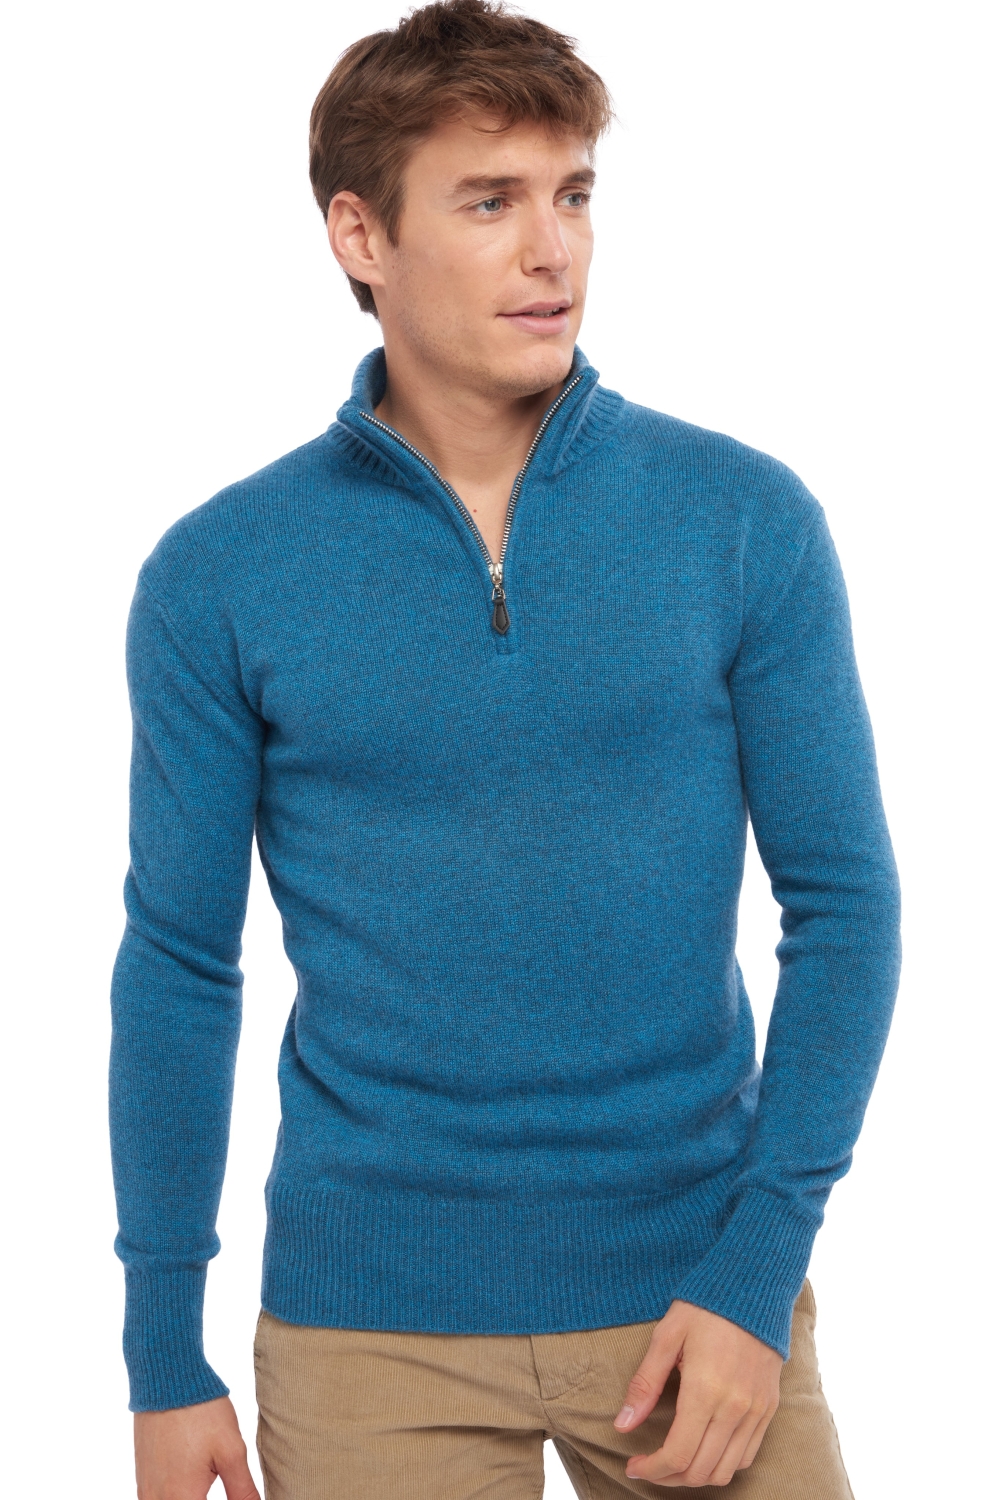 Cashmere men polo style sweaters donovan manor blue s